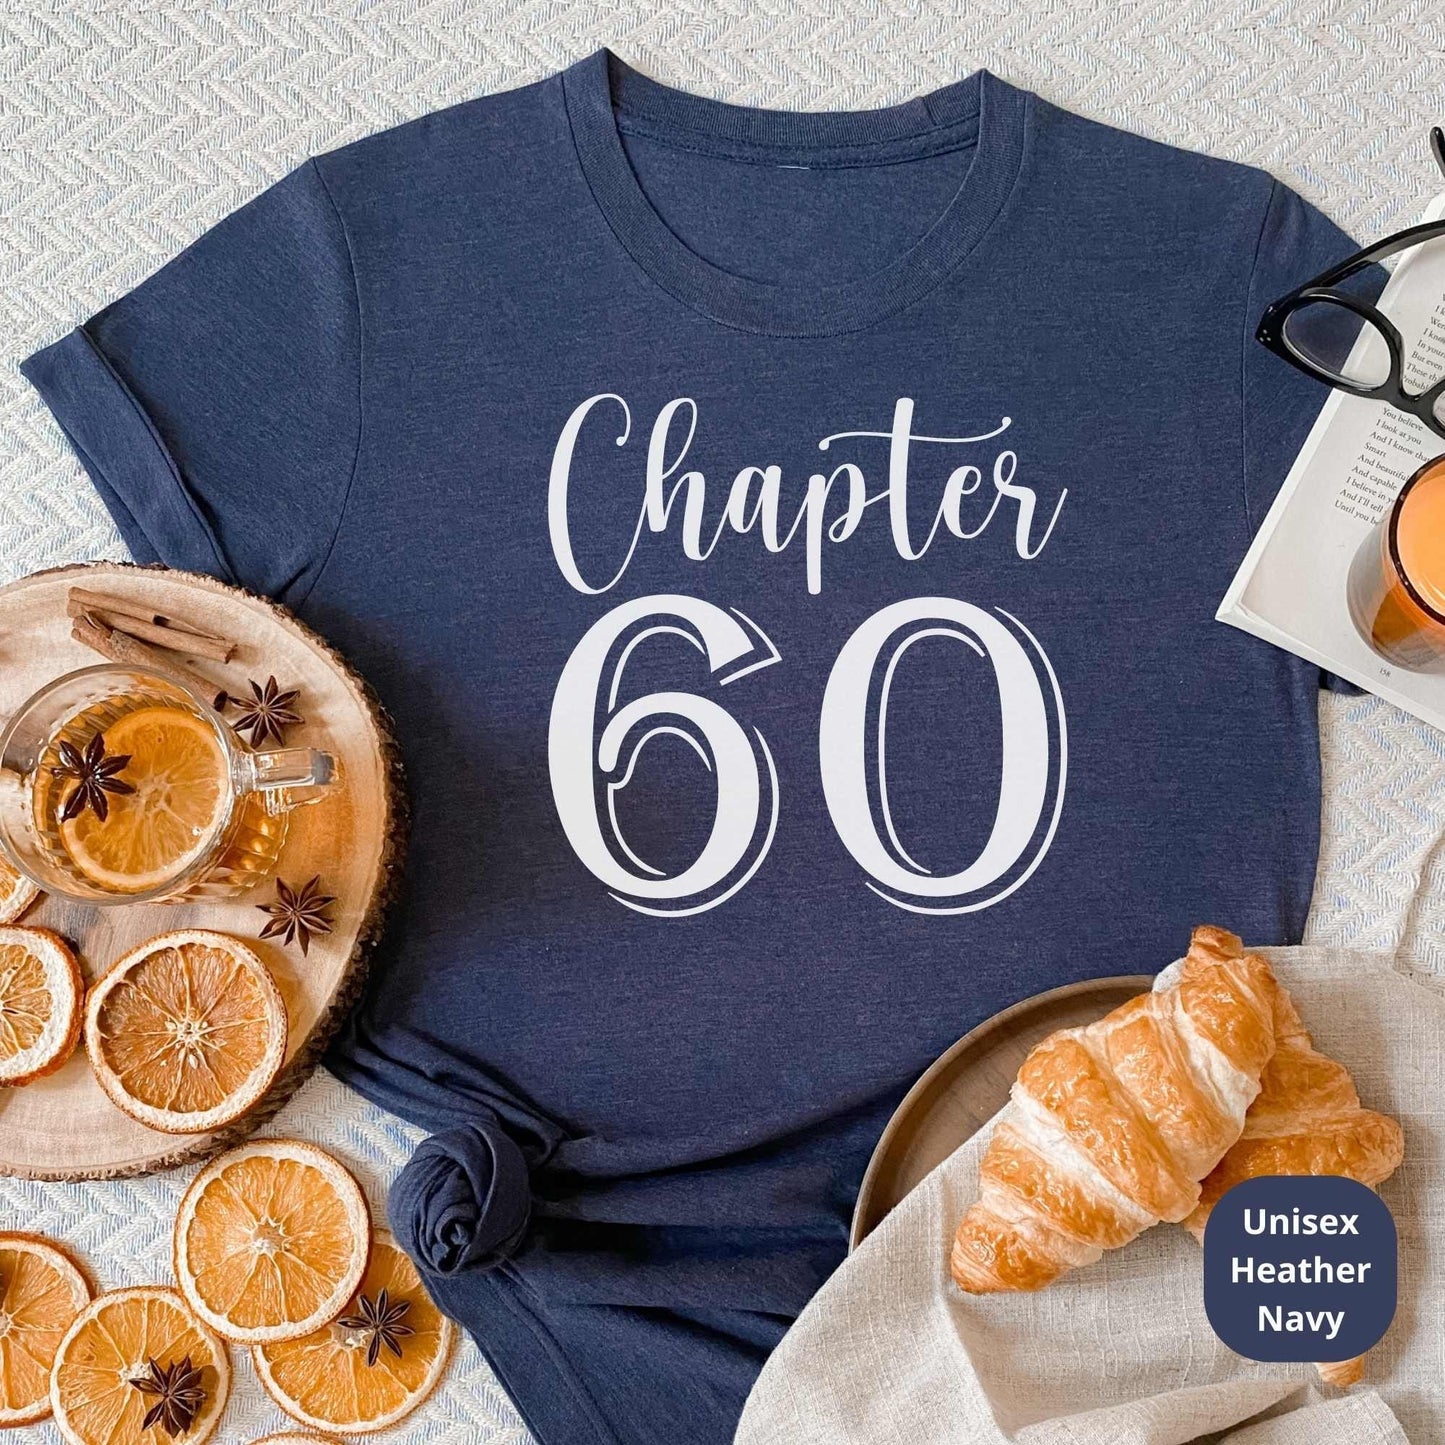 60th Birthday Shirt, Chapter 60 Birthday Gift, Great for Grands, Parents, Aunt, Cousins & Loved Ones Bday Party or Anniversary Celebration HMDesignStudioUS